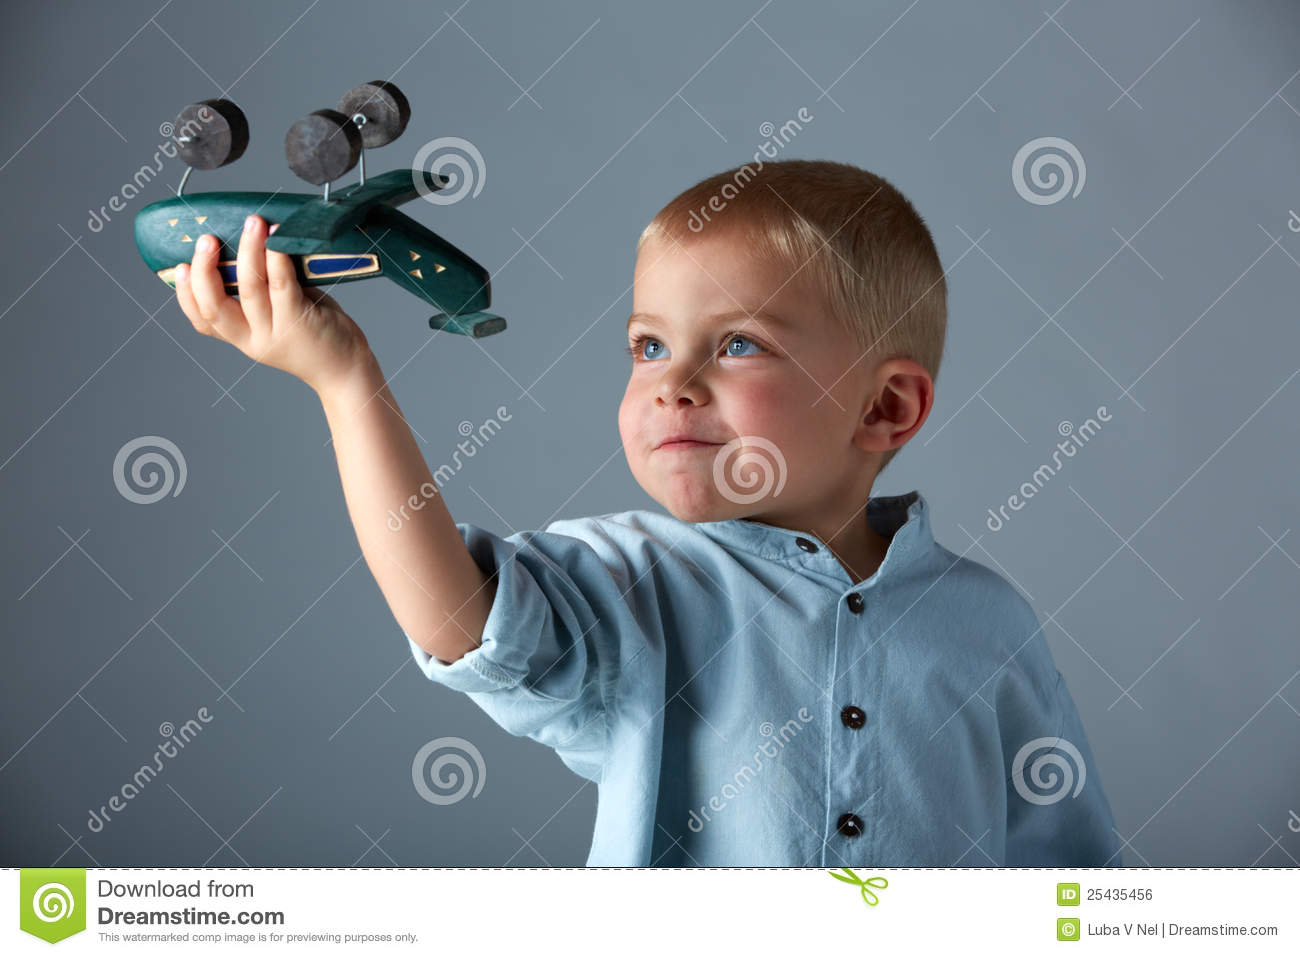 Young Boy With Wooden Airplane Royalty Free Stock Image   Image